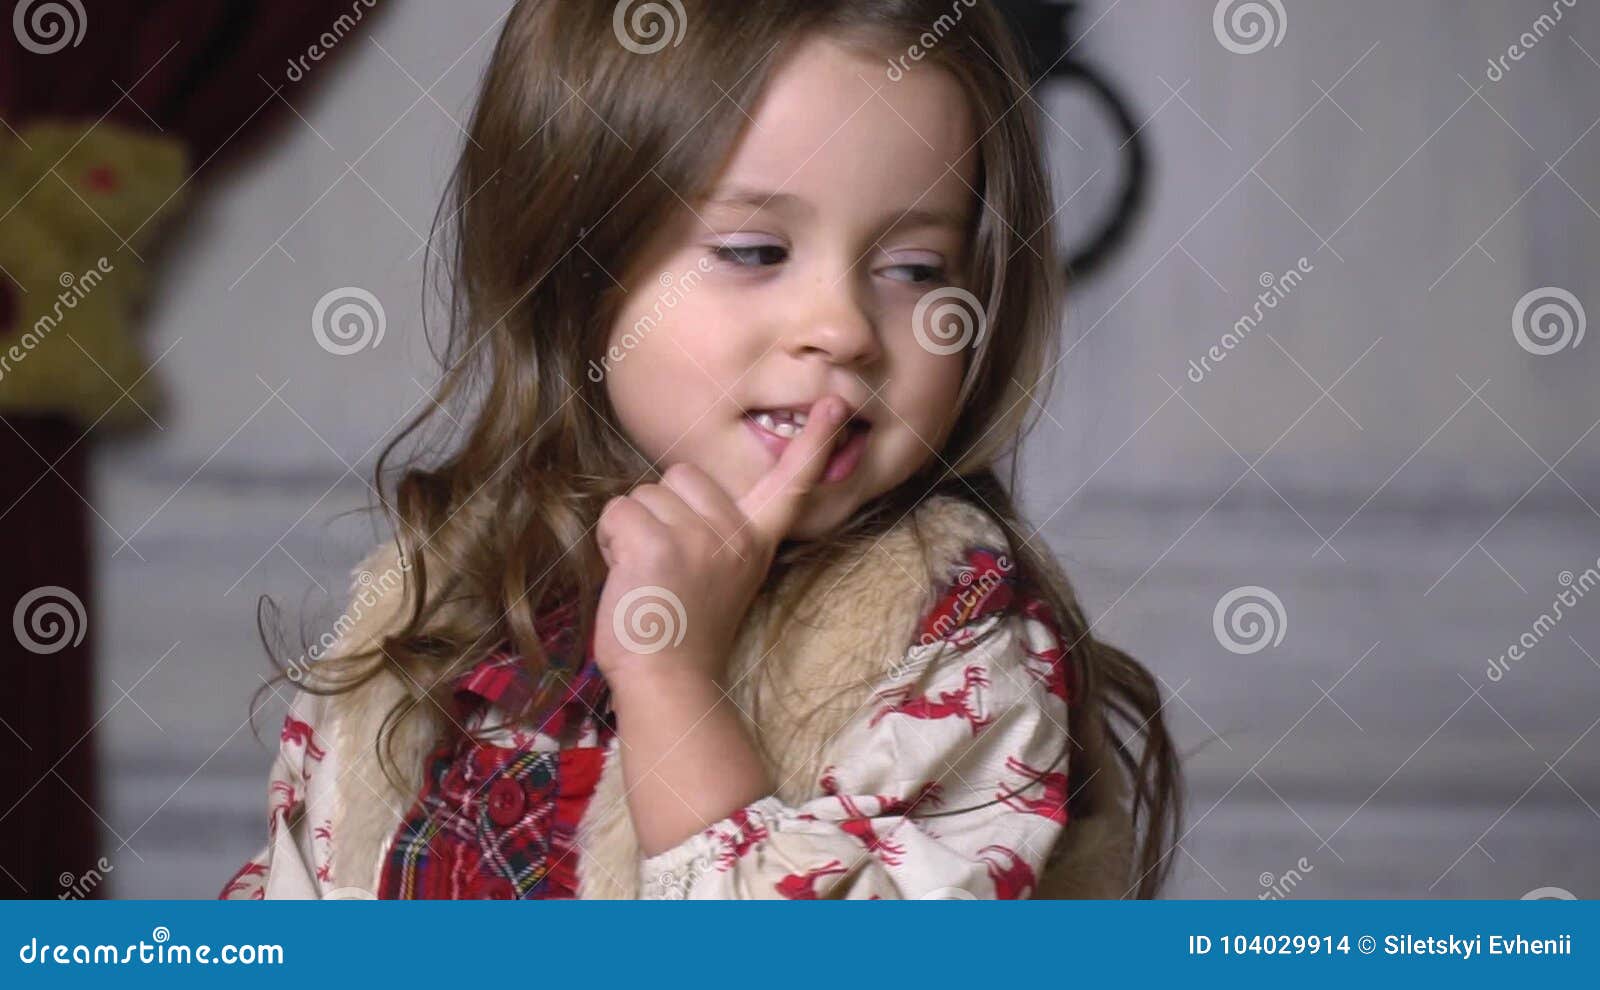 The Girl Shows To Be Quiet Slow Motion Stock Footage Video Of Cute